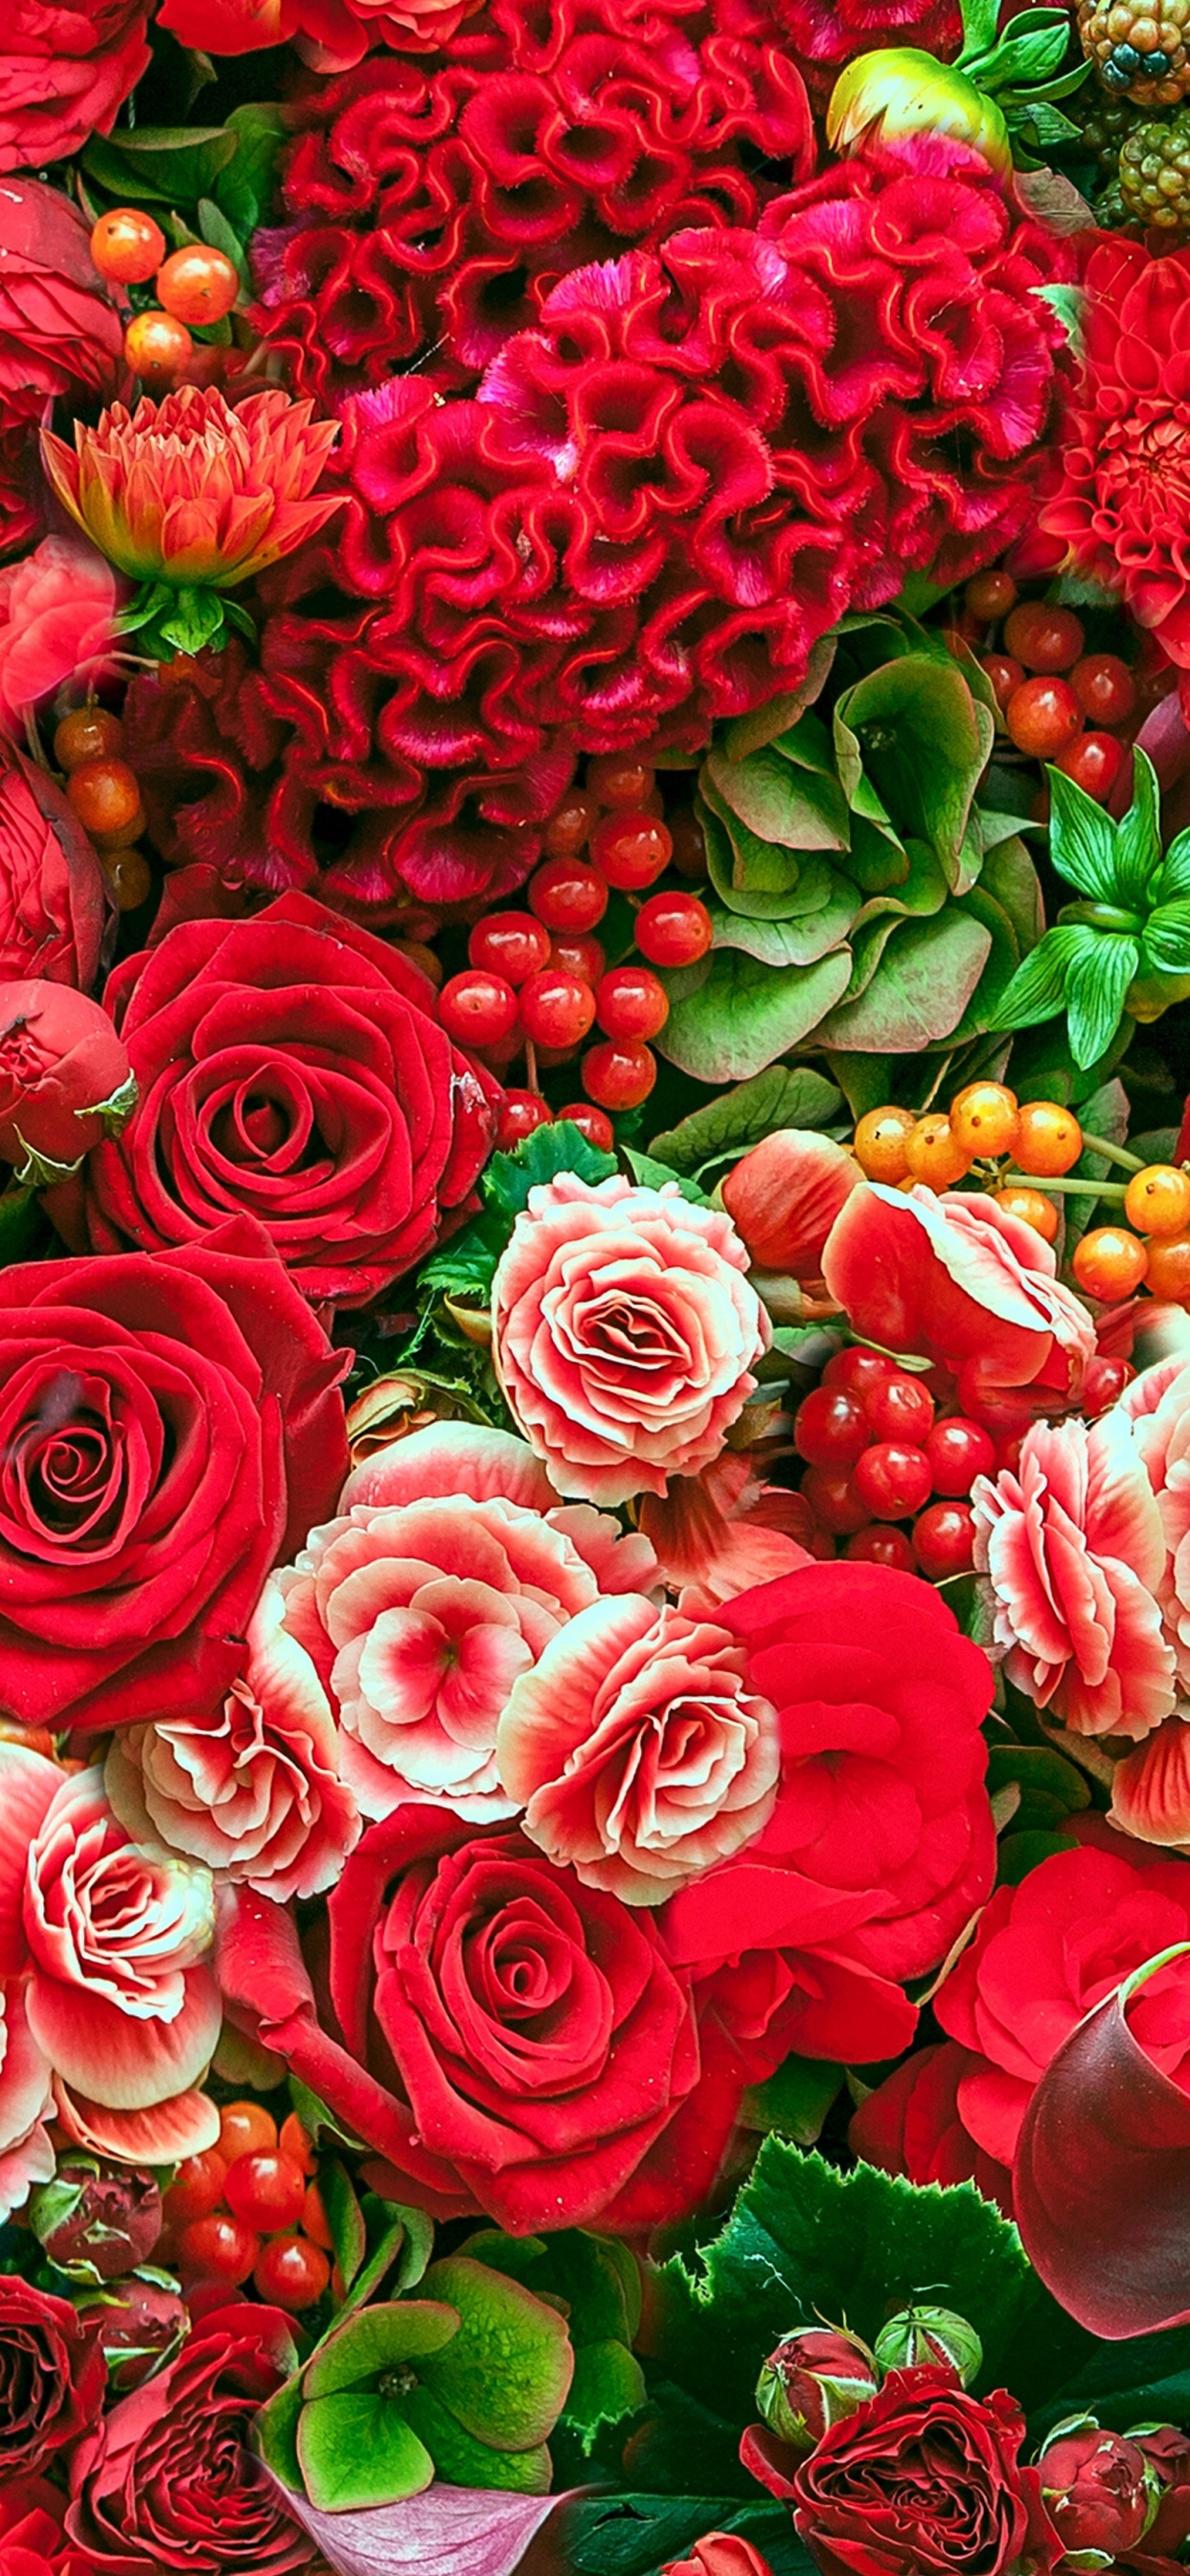 Red Roses With Green Leaves. Wallpaper in 1242x2688 Resolution